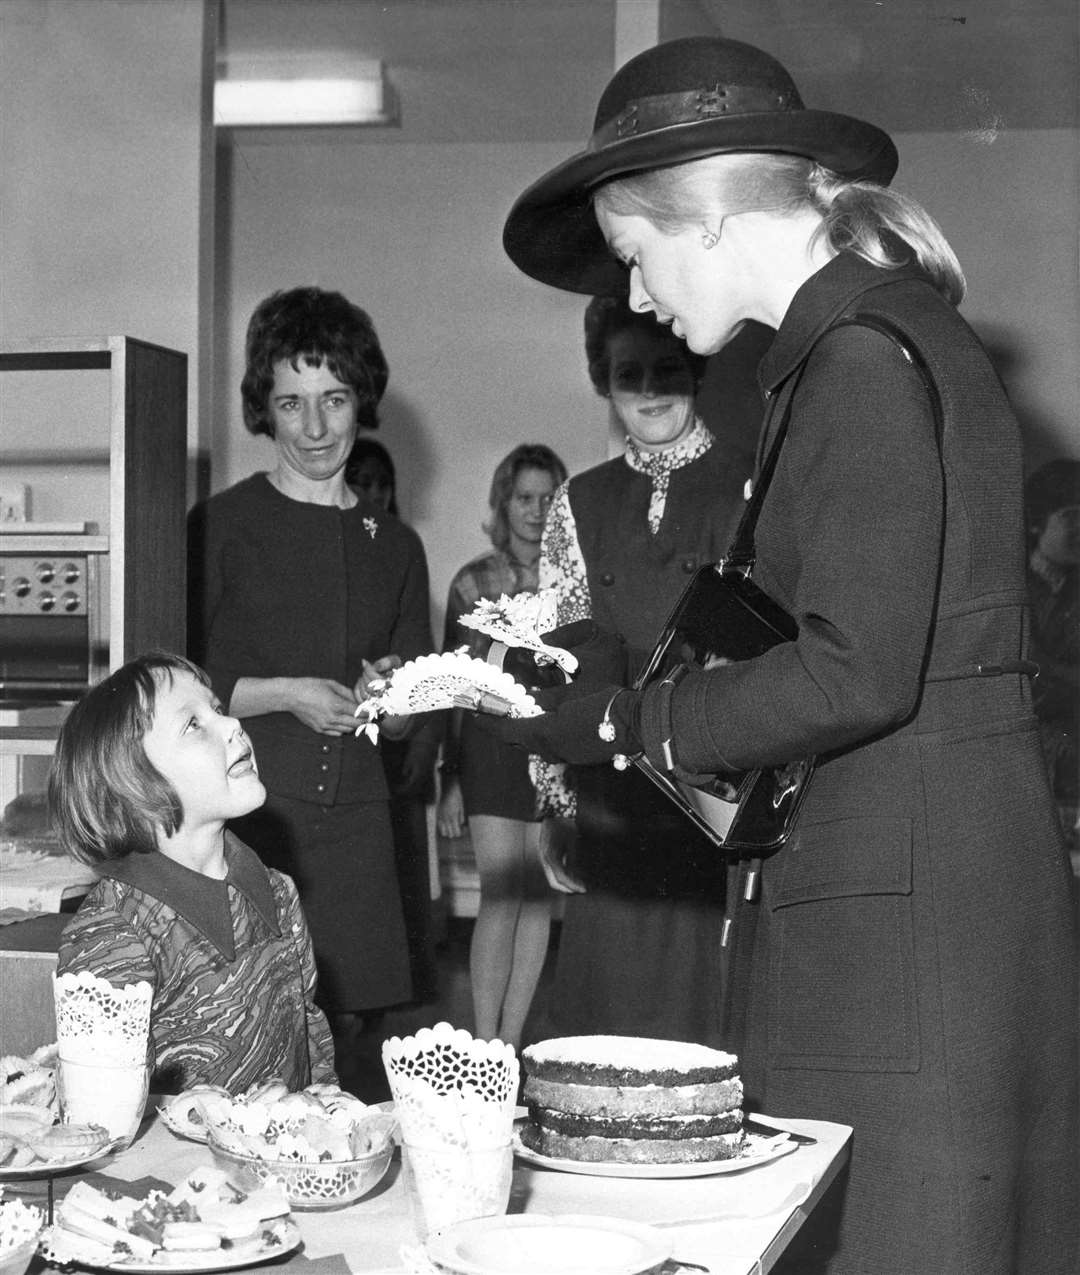 In March 1971, the Duchess of Kent unveiled a commemorative lectern to mark opening of Sheppey School. She then toured classrooms chatting to pupils and staff. Here she is seen with four-year-old Dawn Baker